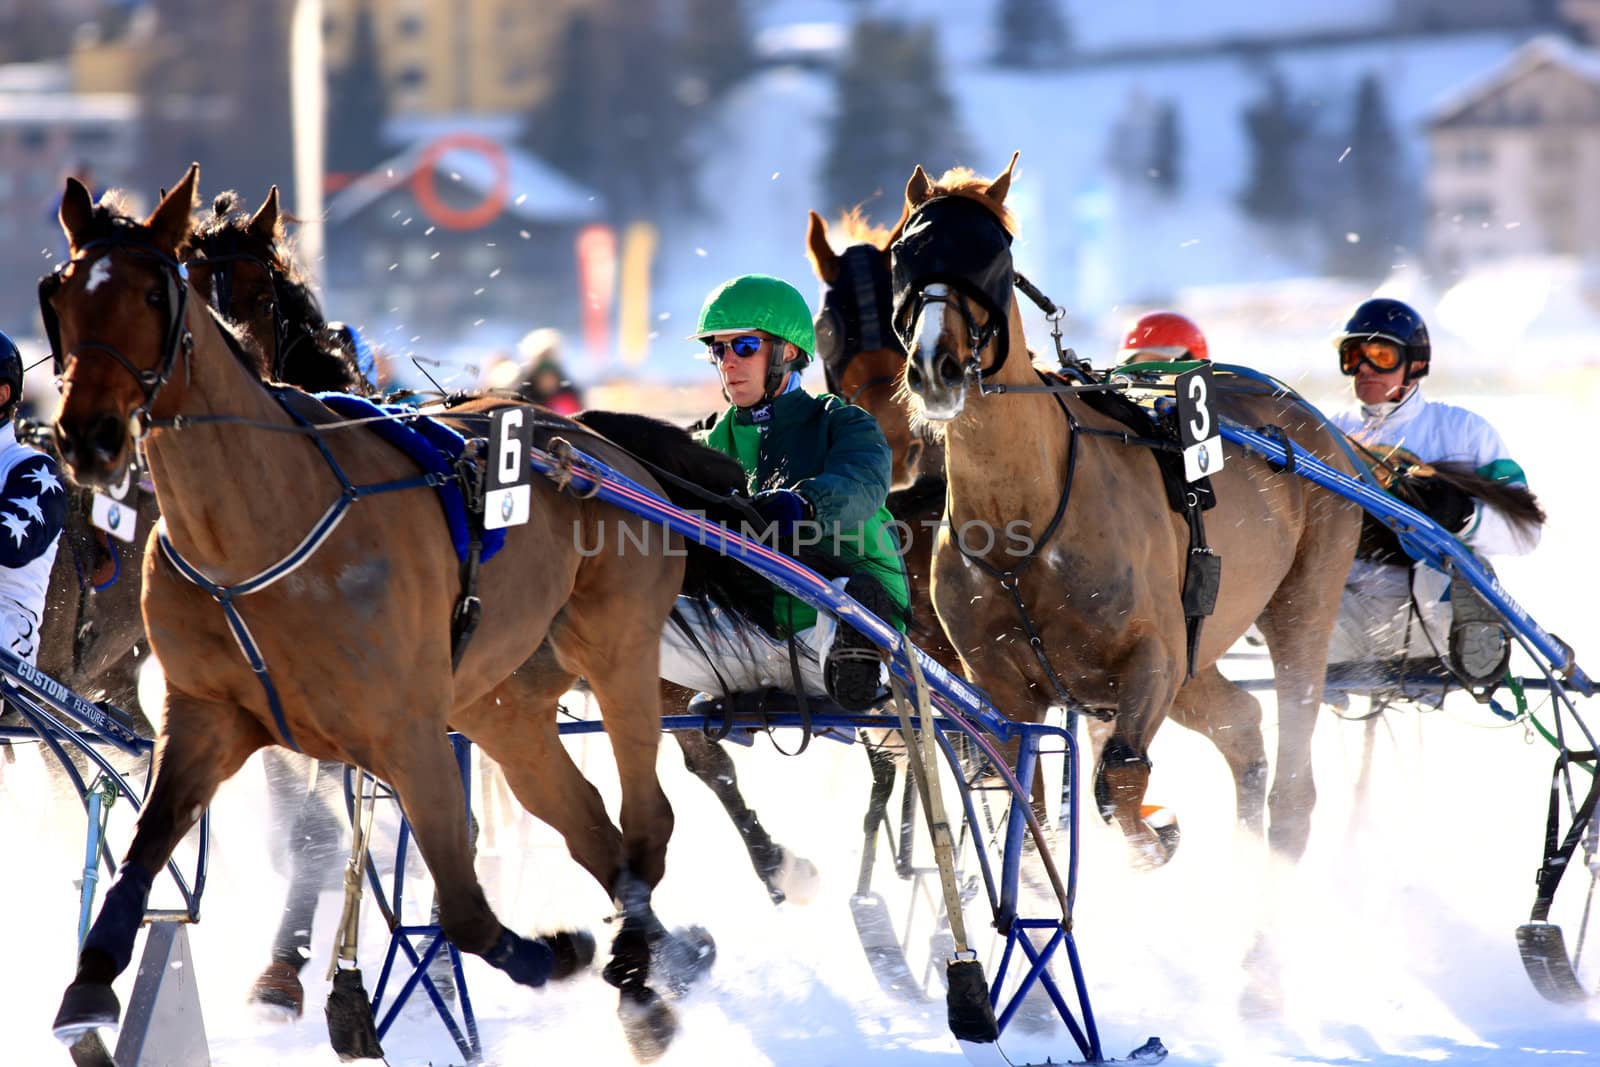 Trotting Race in the snow by monner